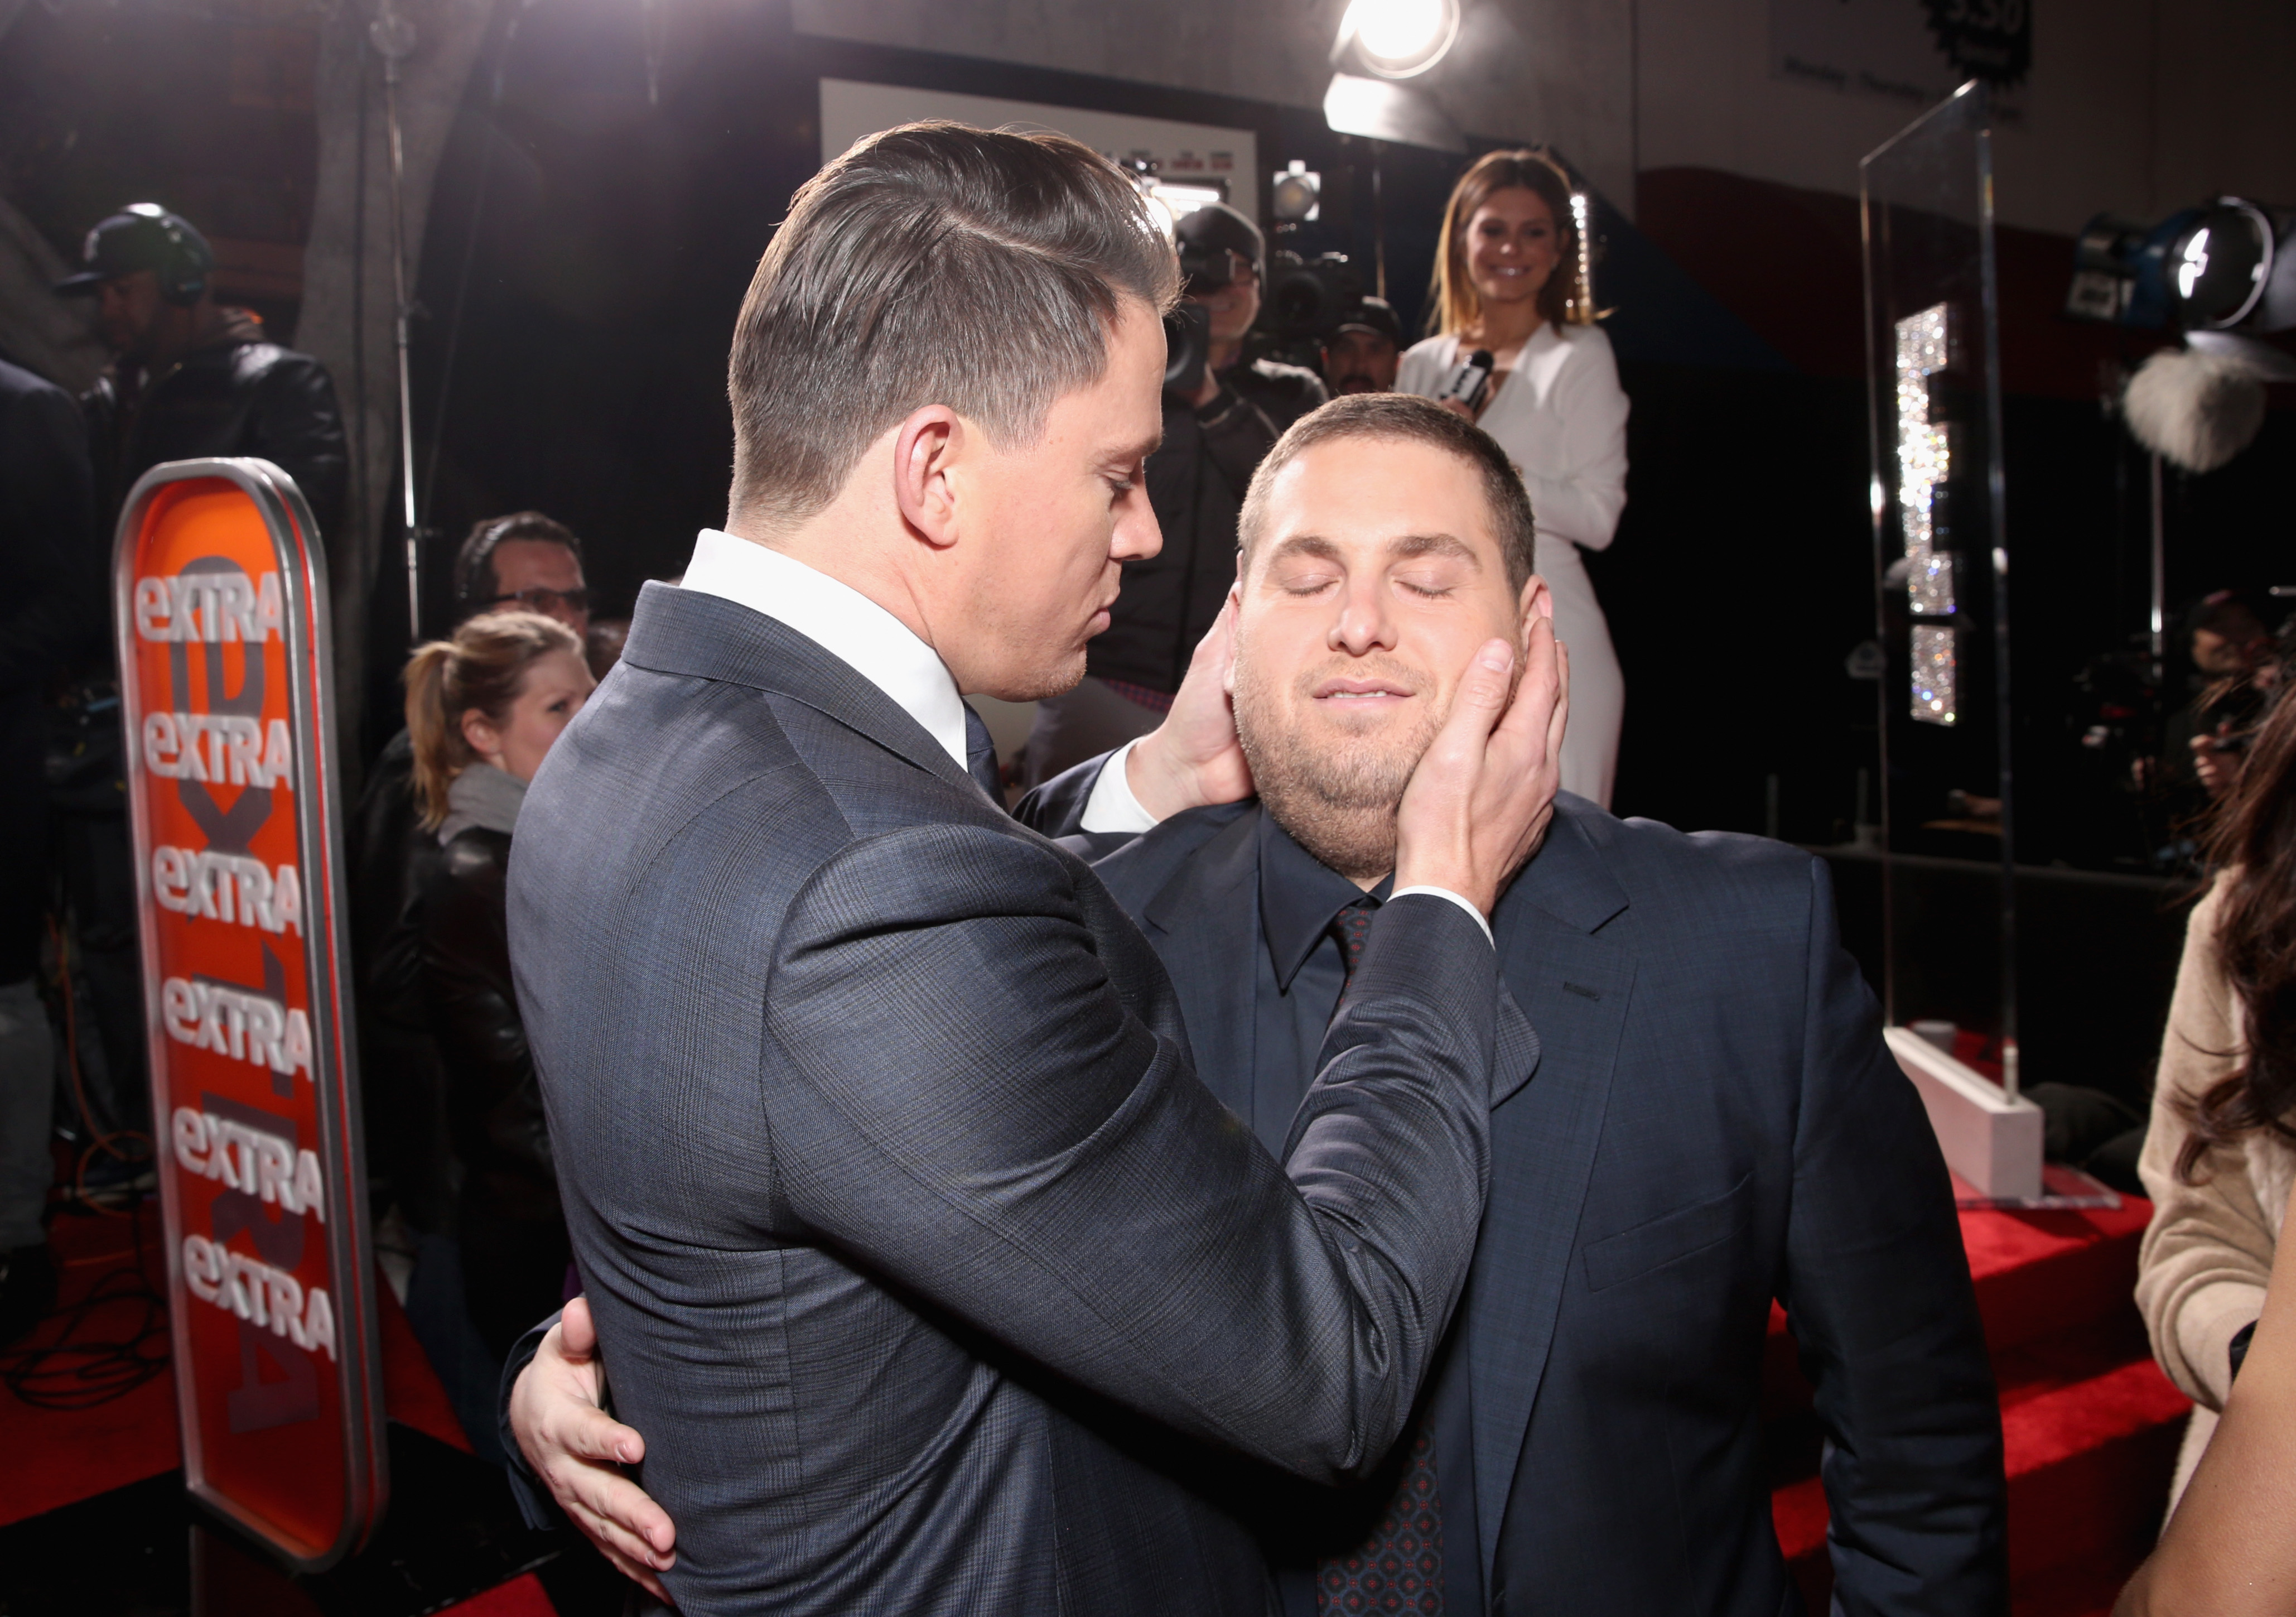 Even a caress from Channing Tatum doesn't get him to smile.